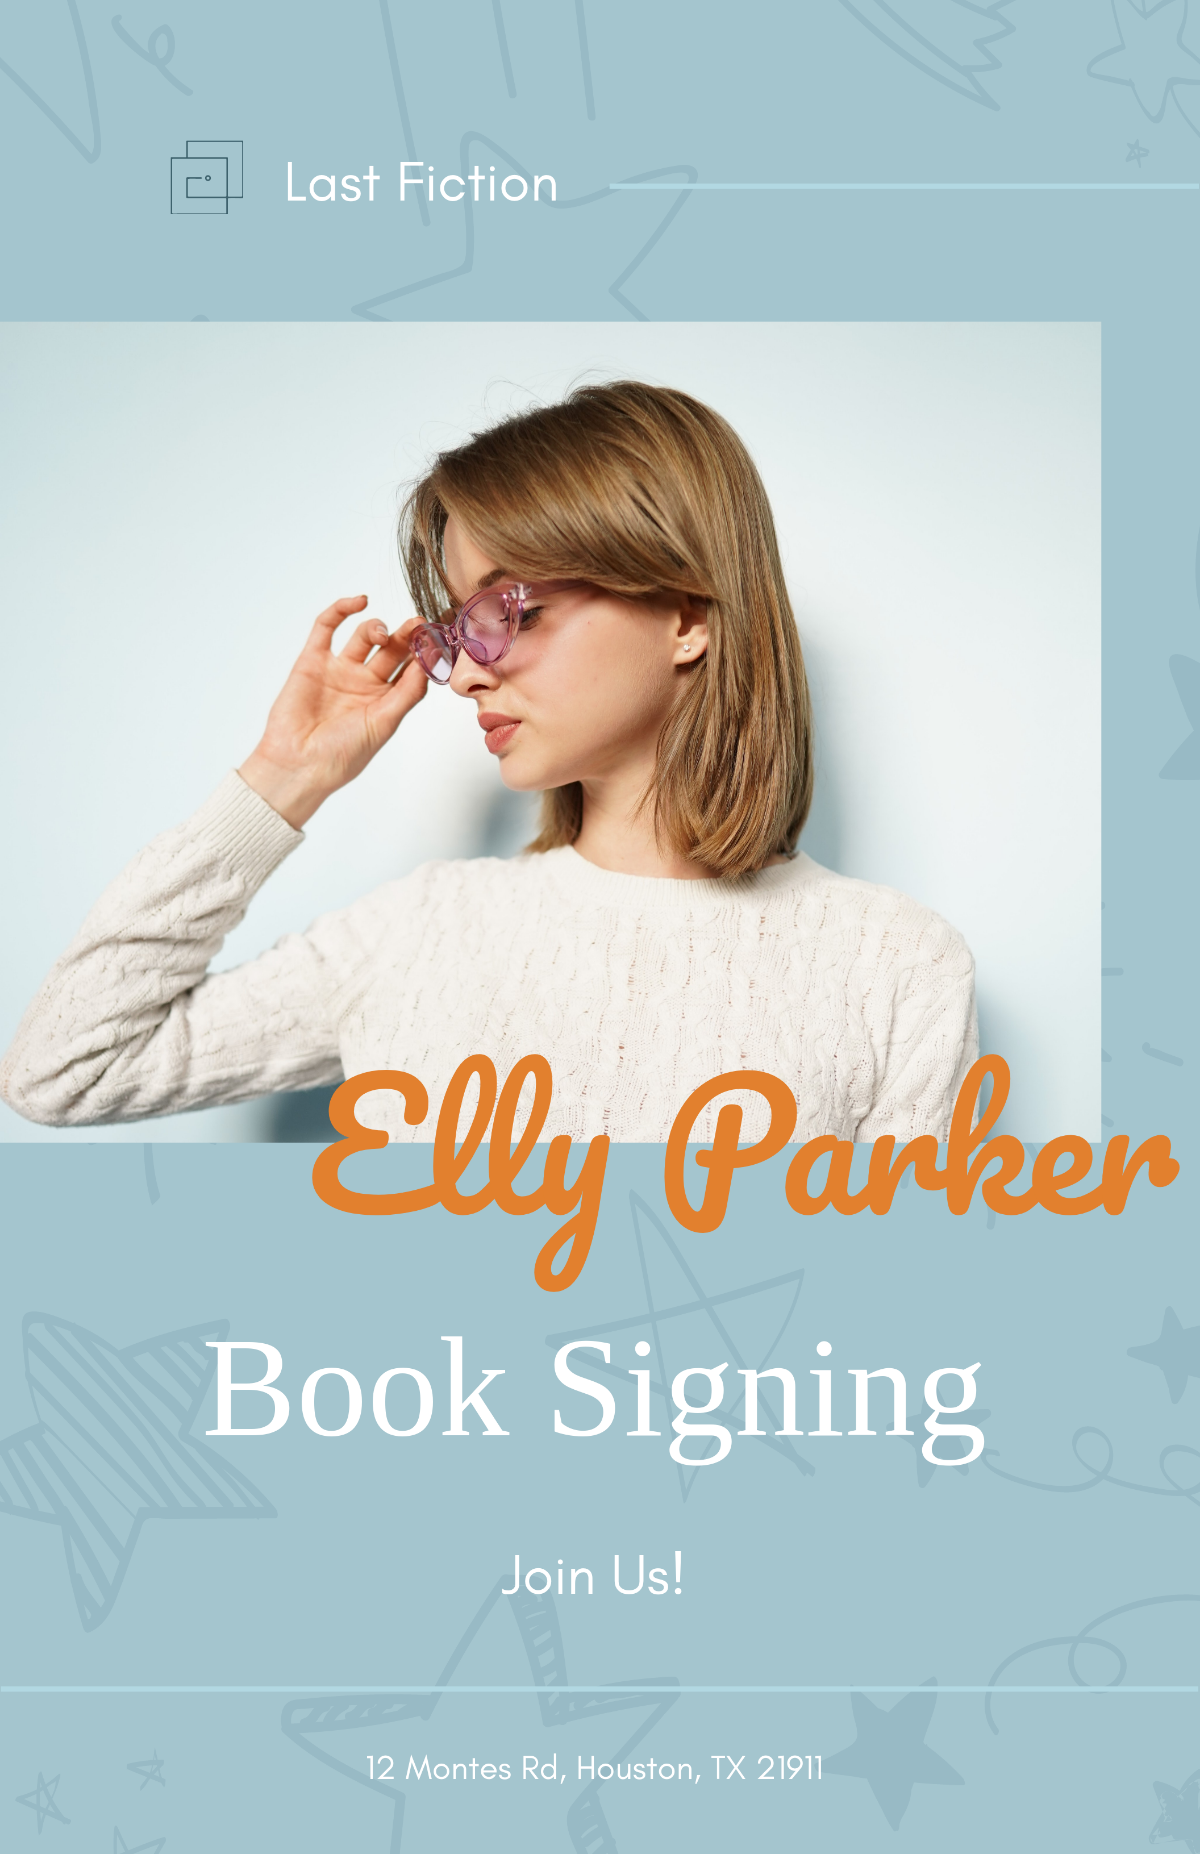 Free Book Signing Promotion Poster Template